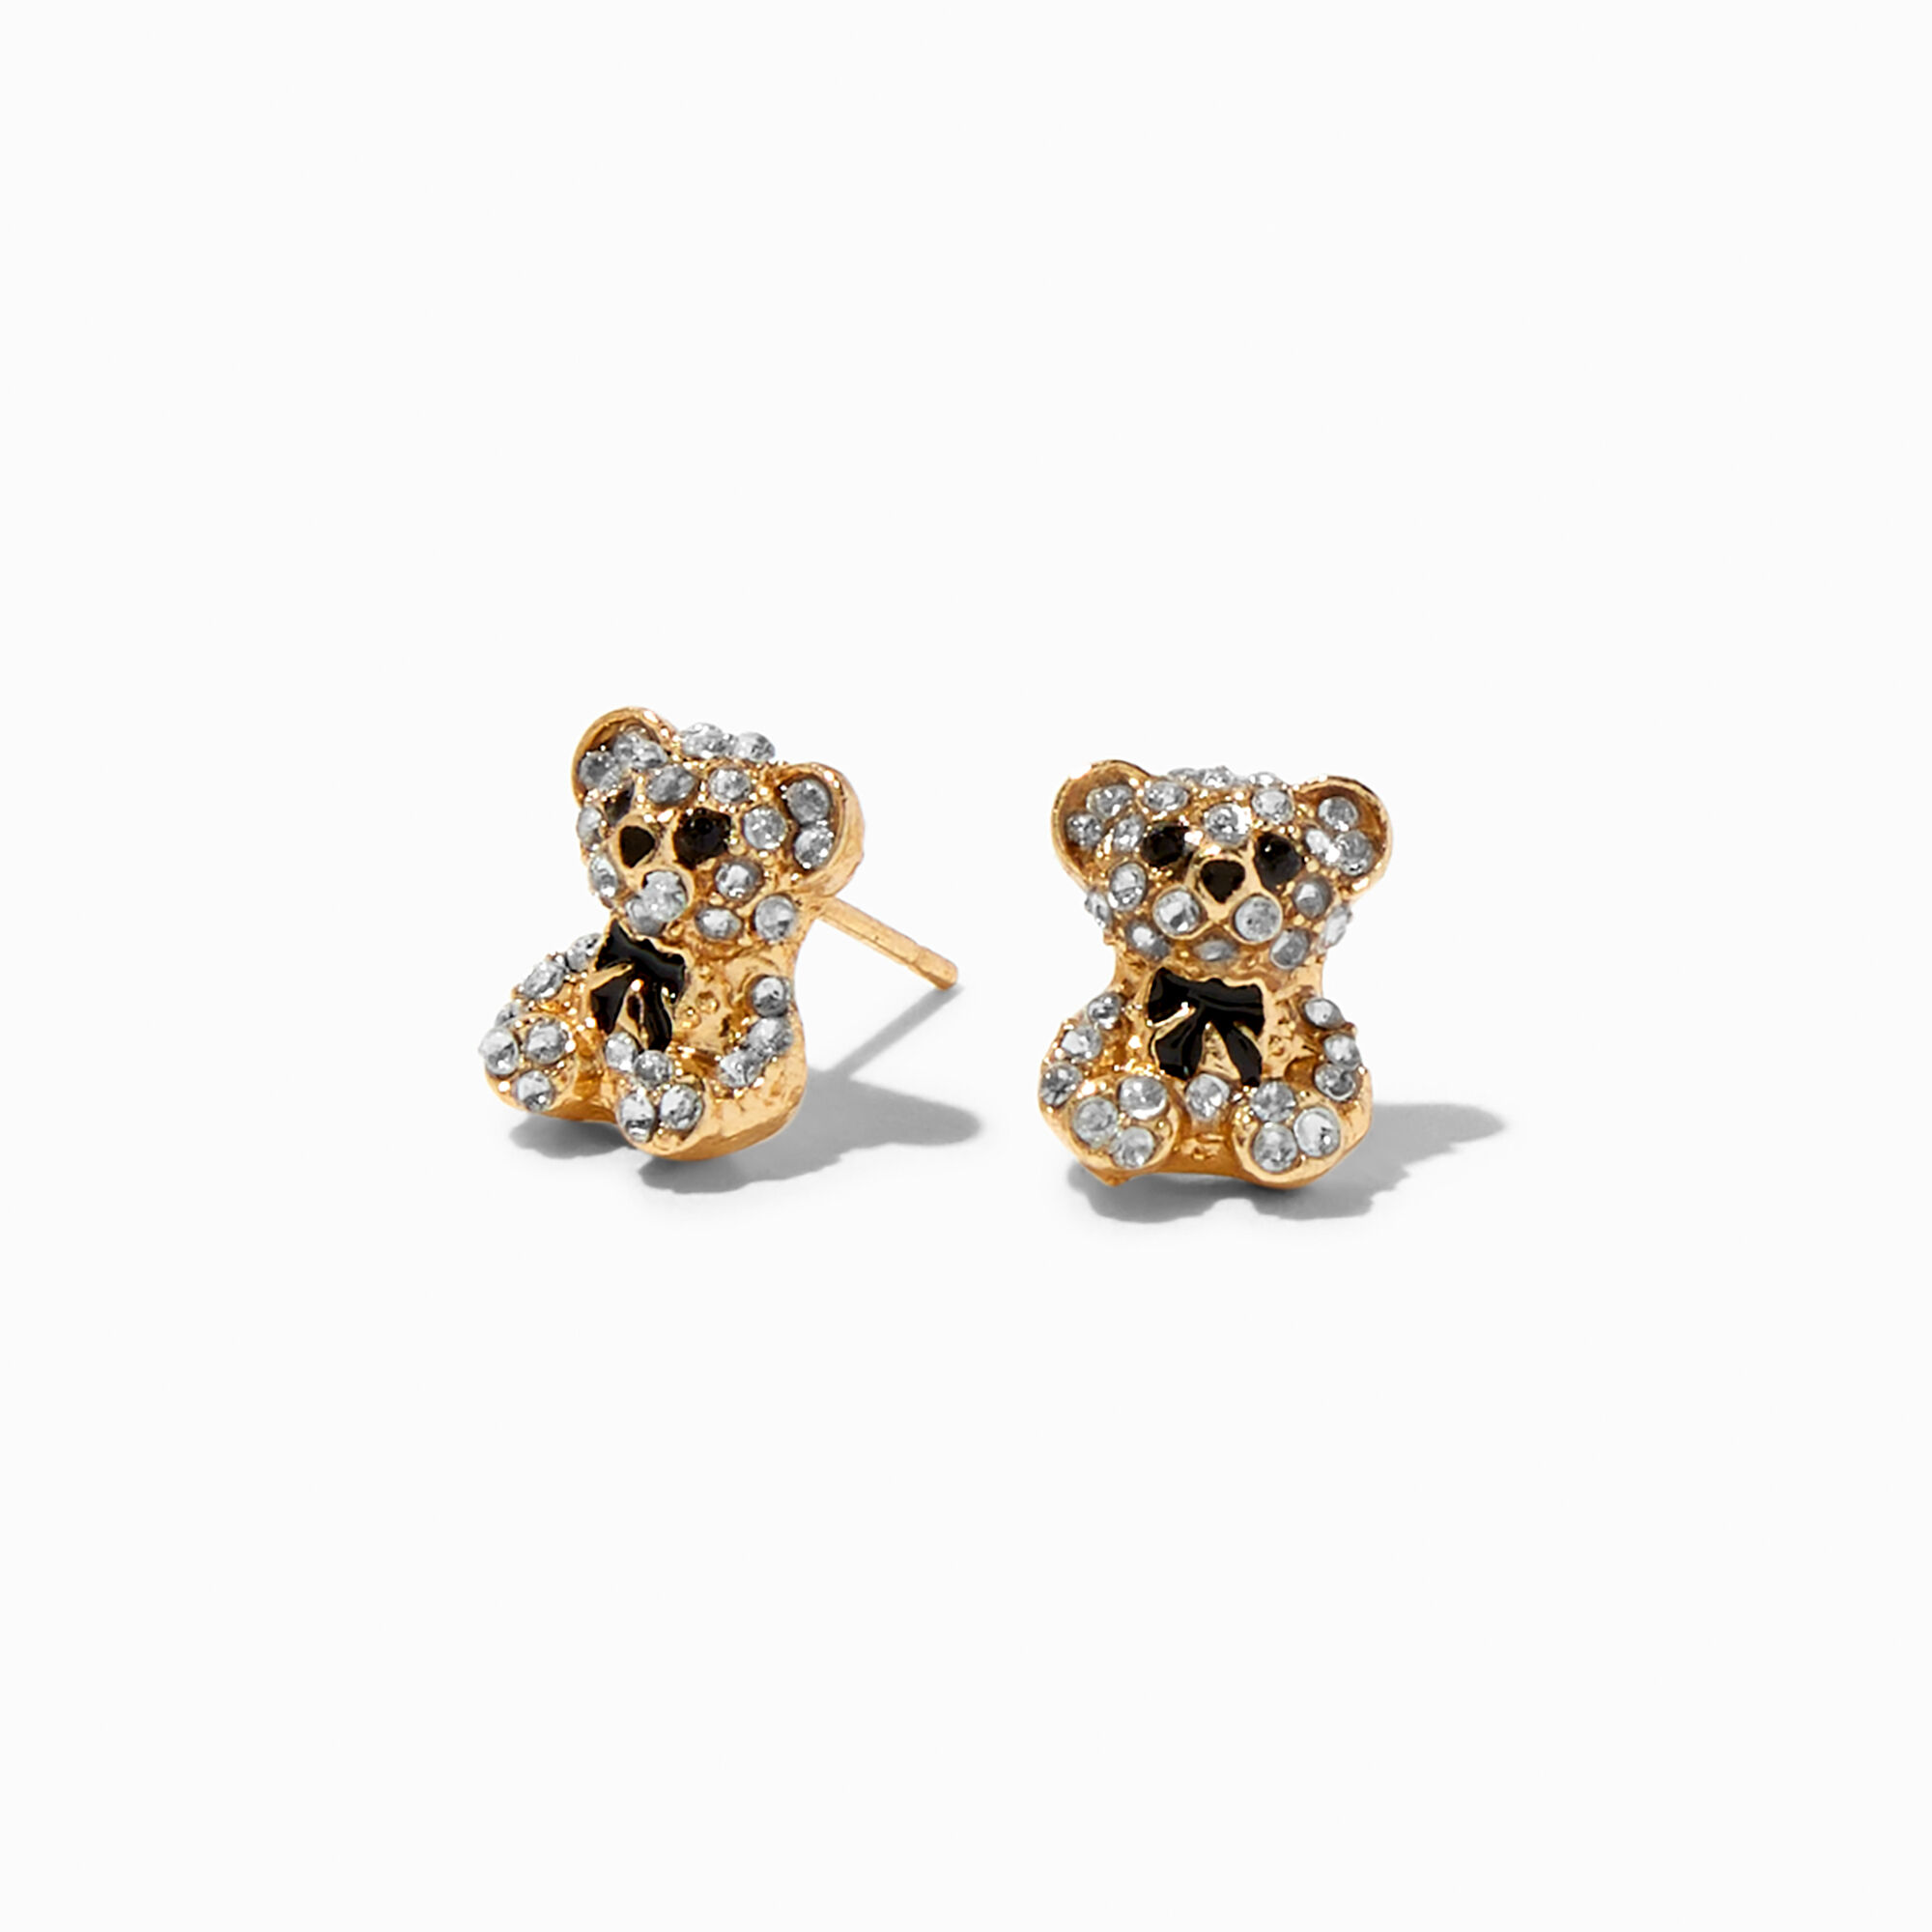 View Claires Crystal Teddy Bear Stud Earrings Gold information